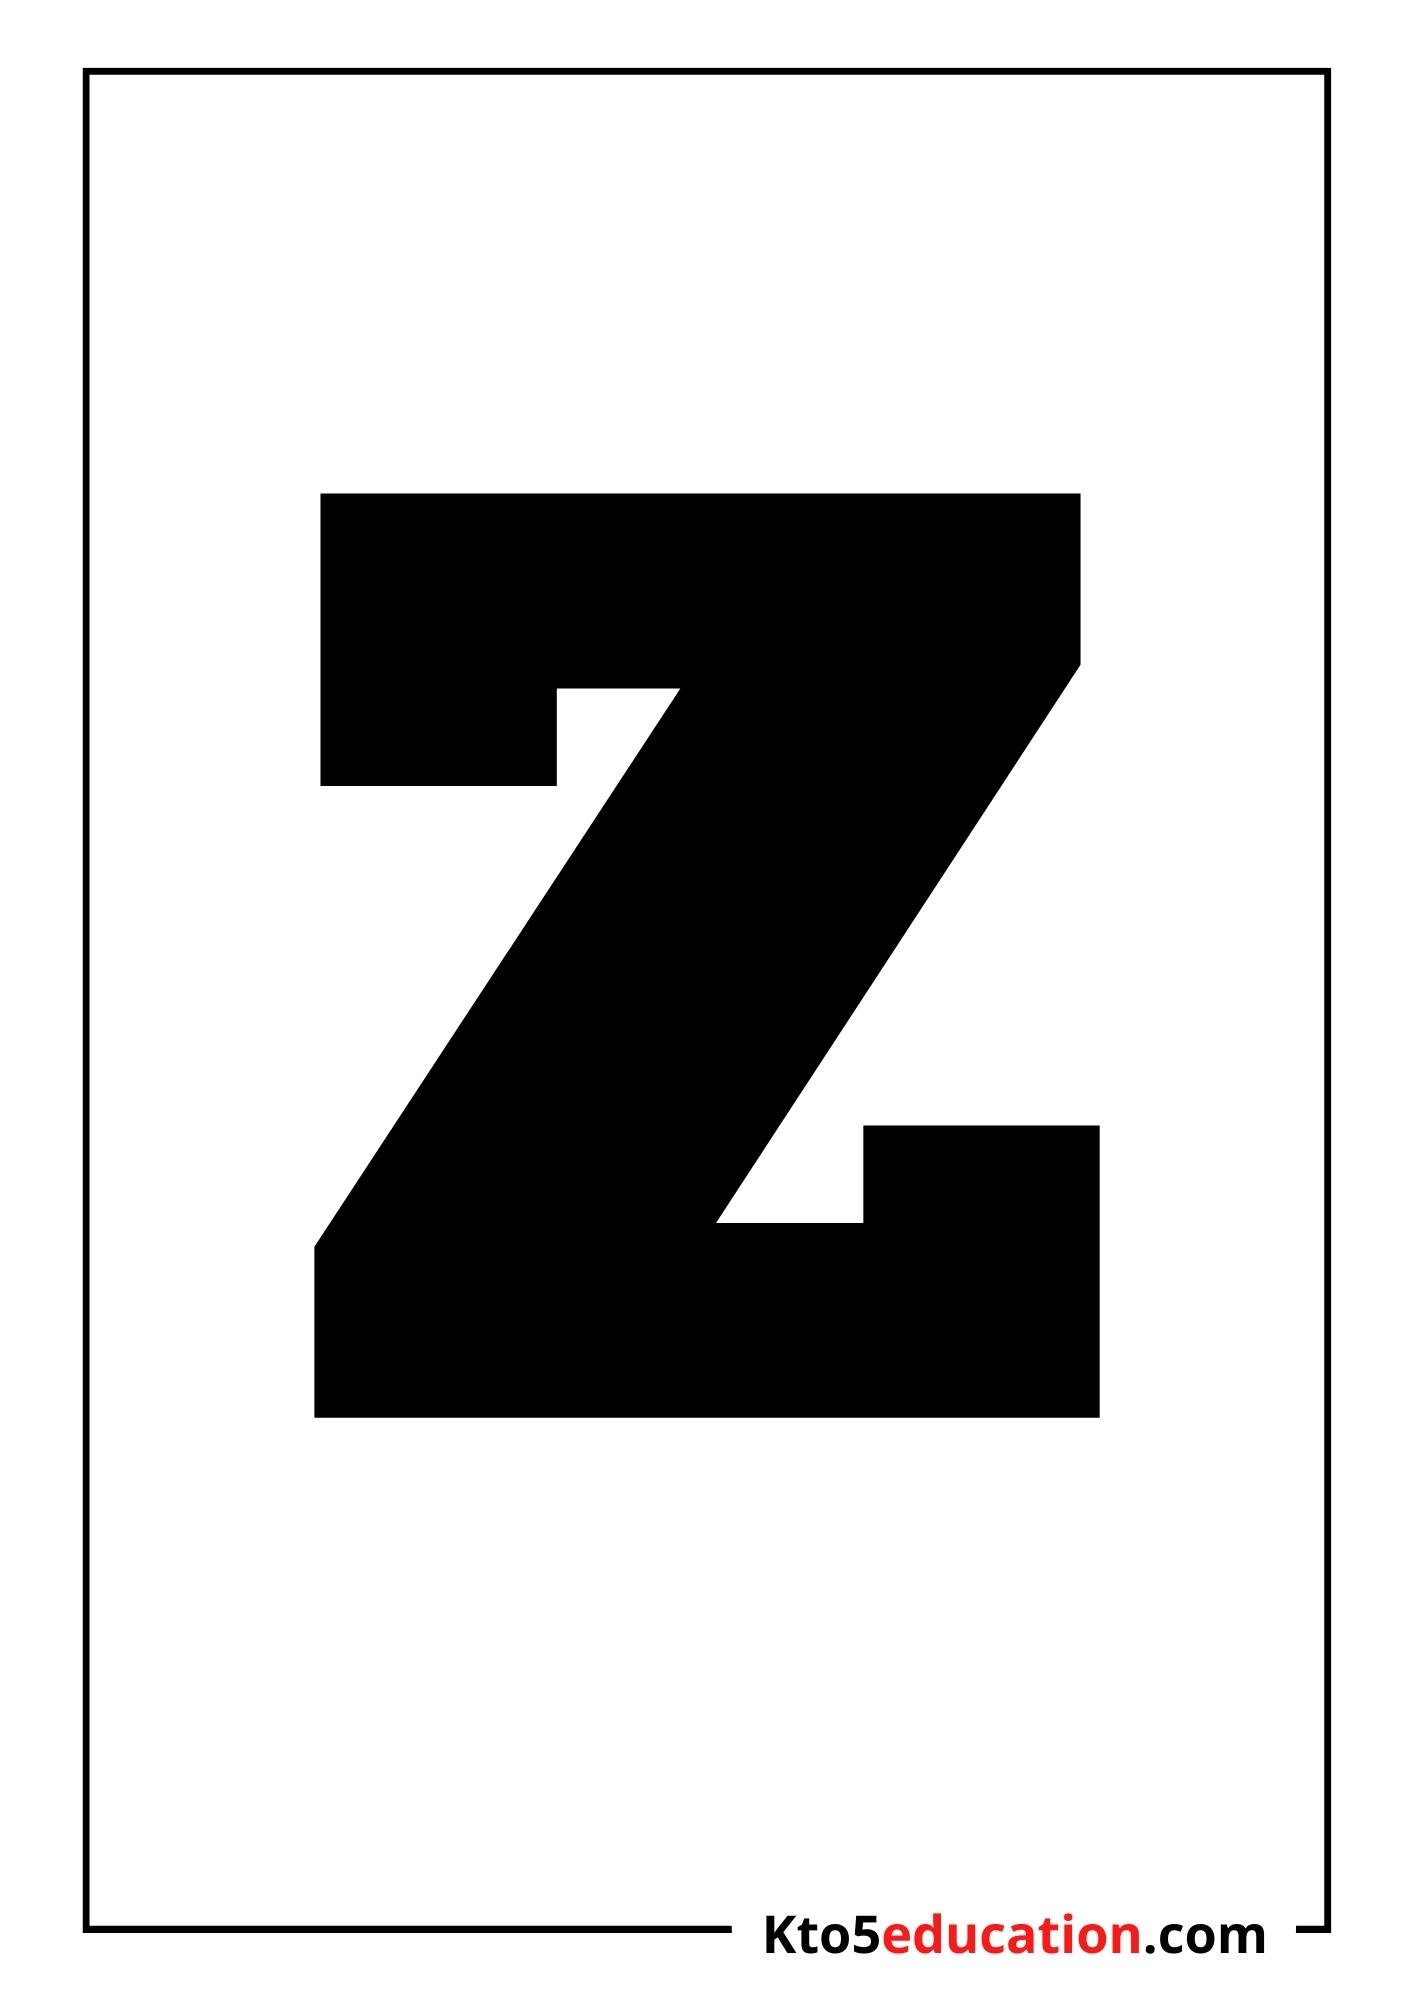 Free Printable Letter Z Silhouette